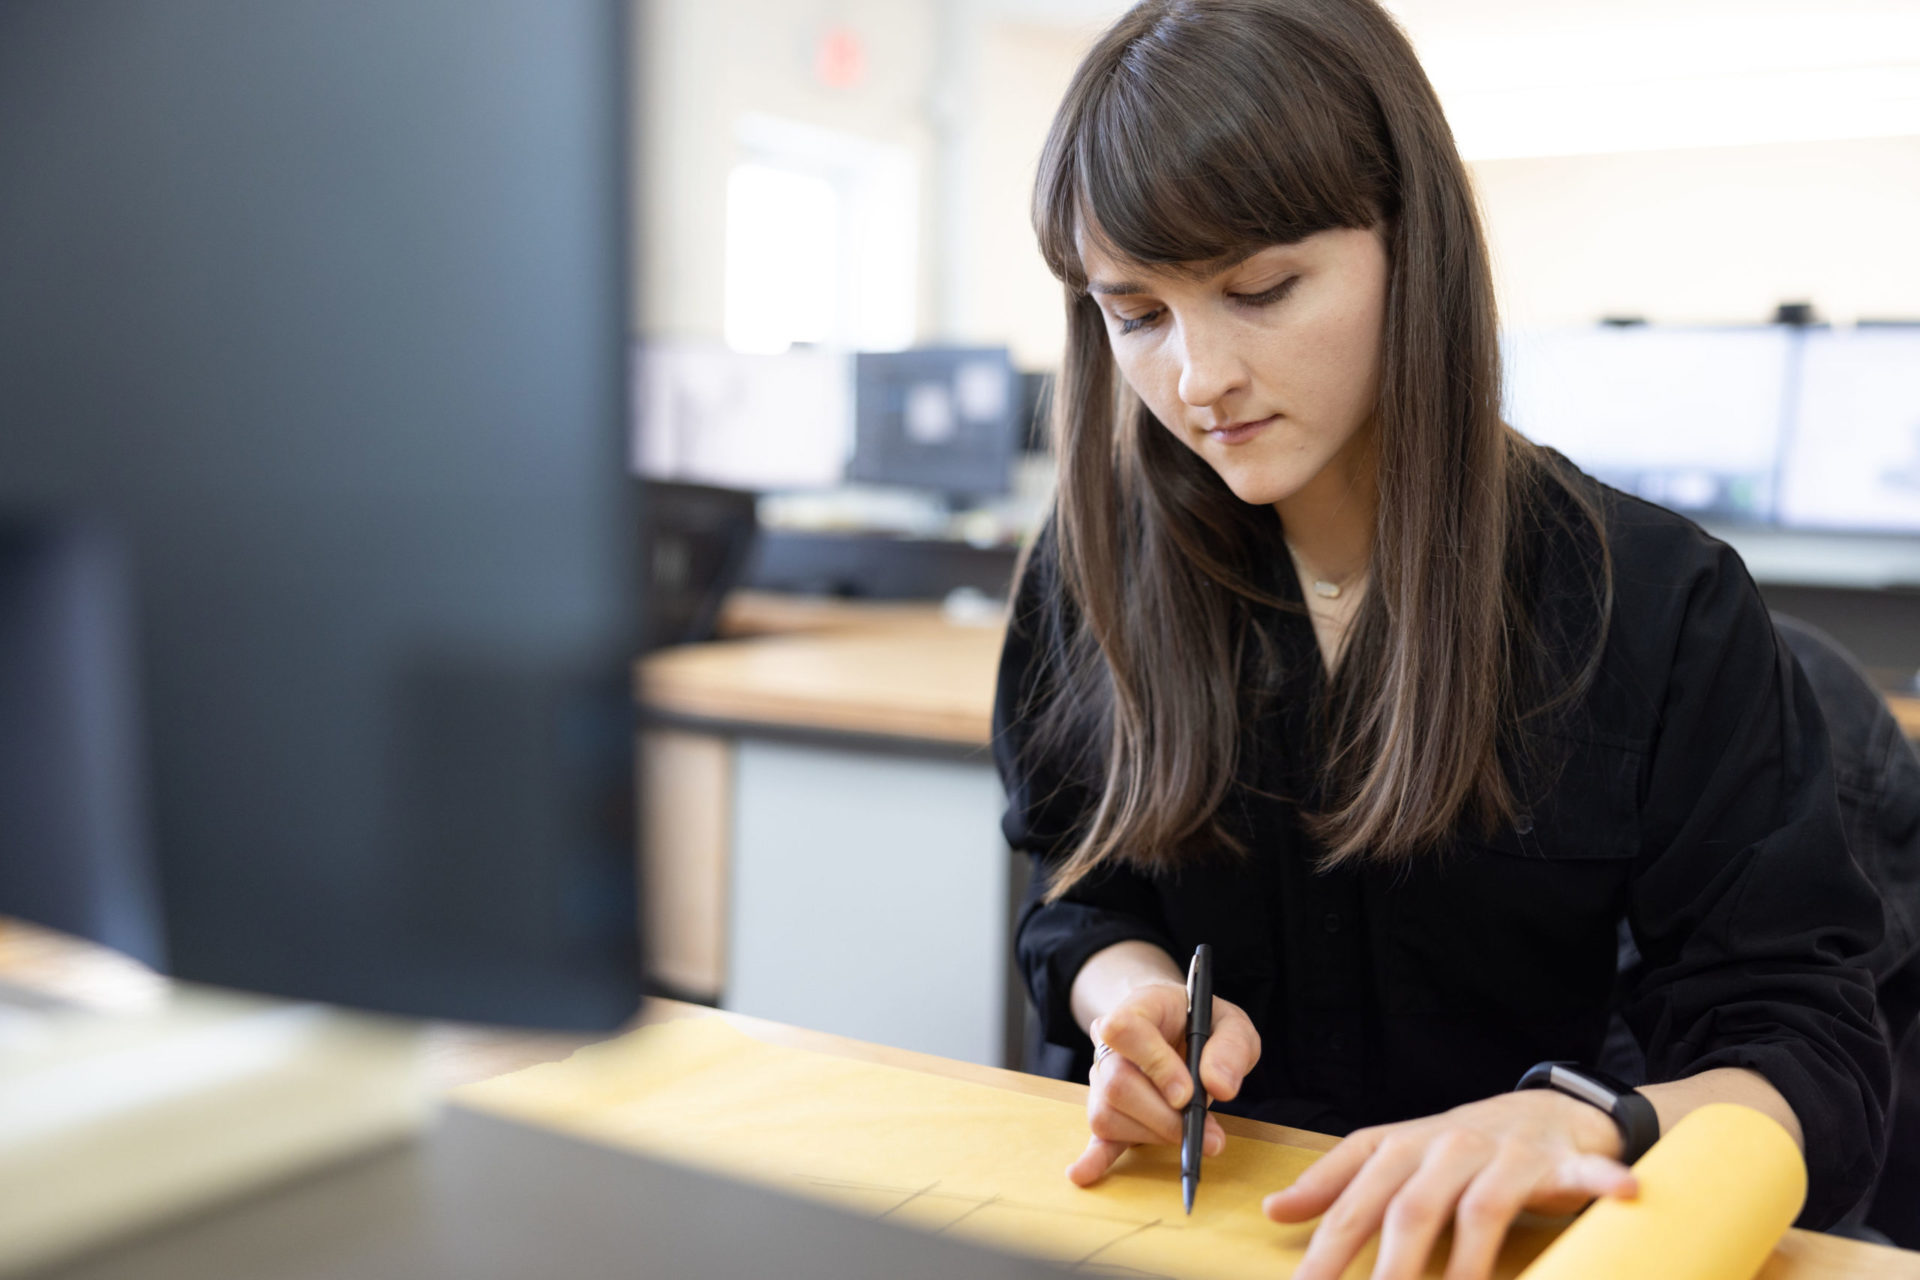 A young female team member with brown hair working on architectural plans with a pen